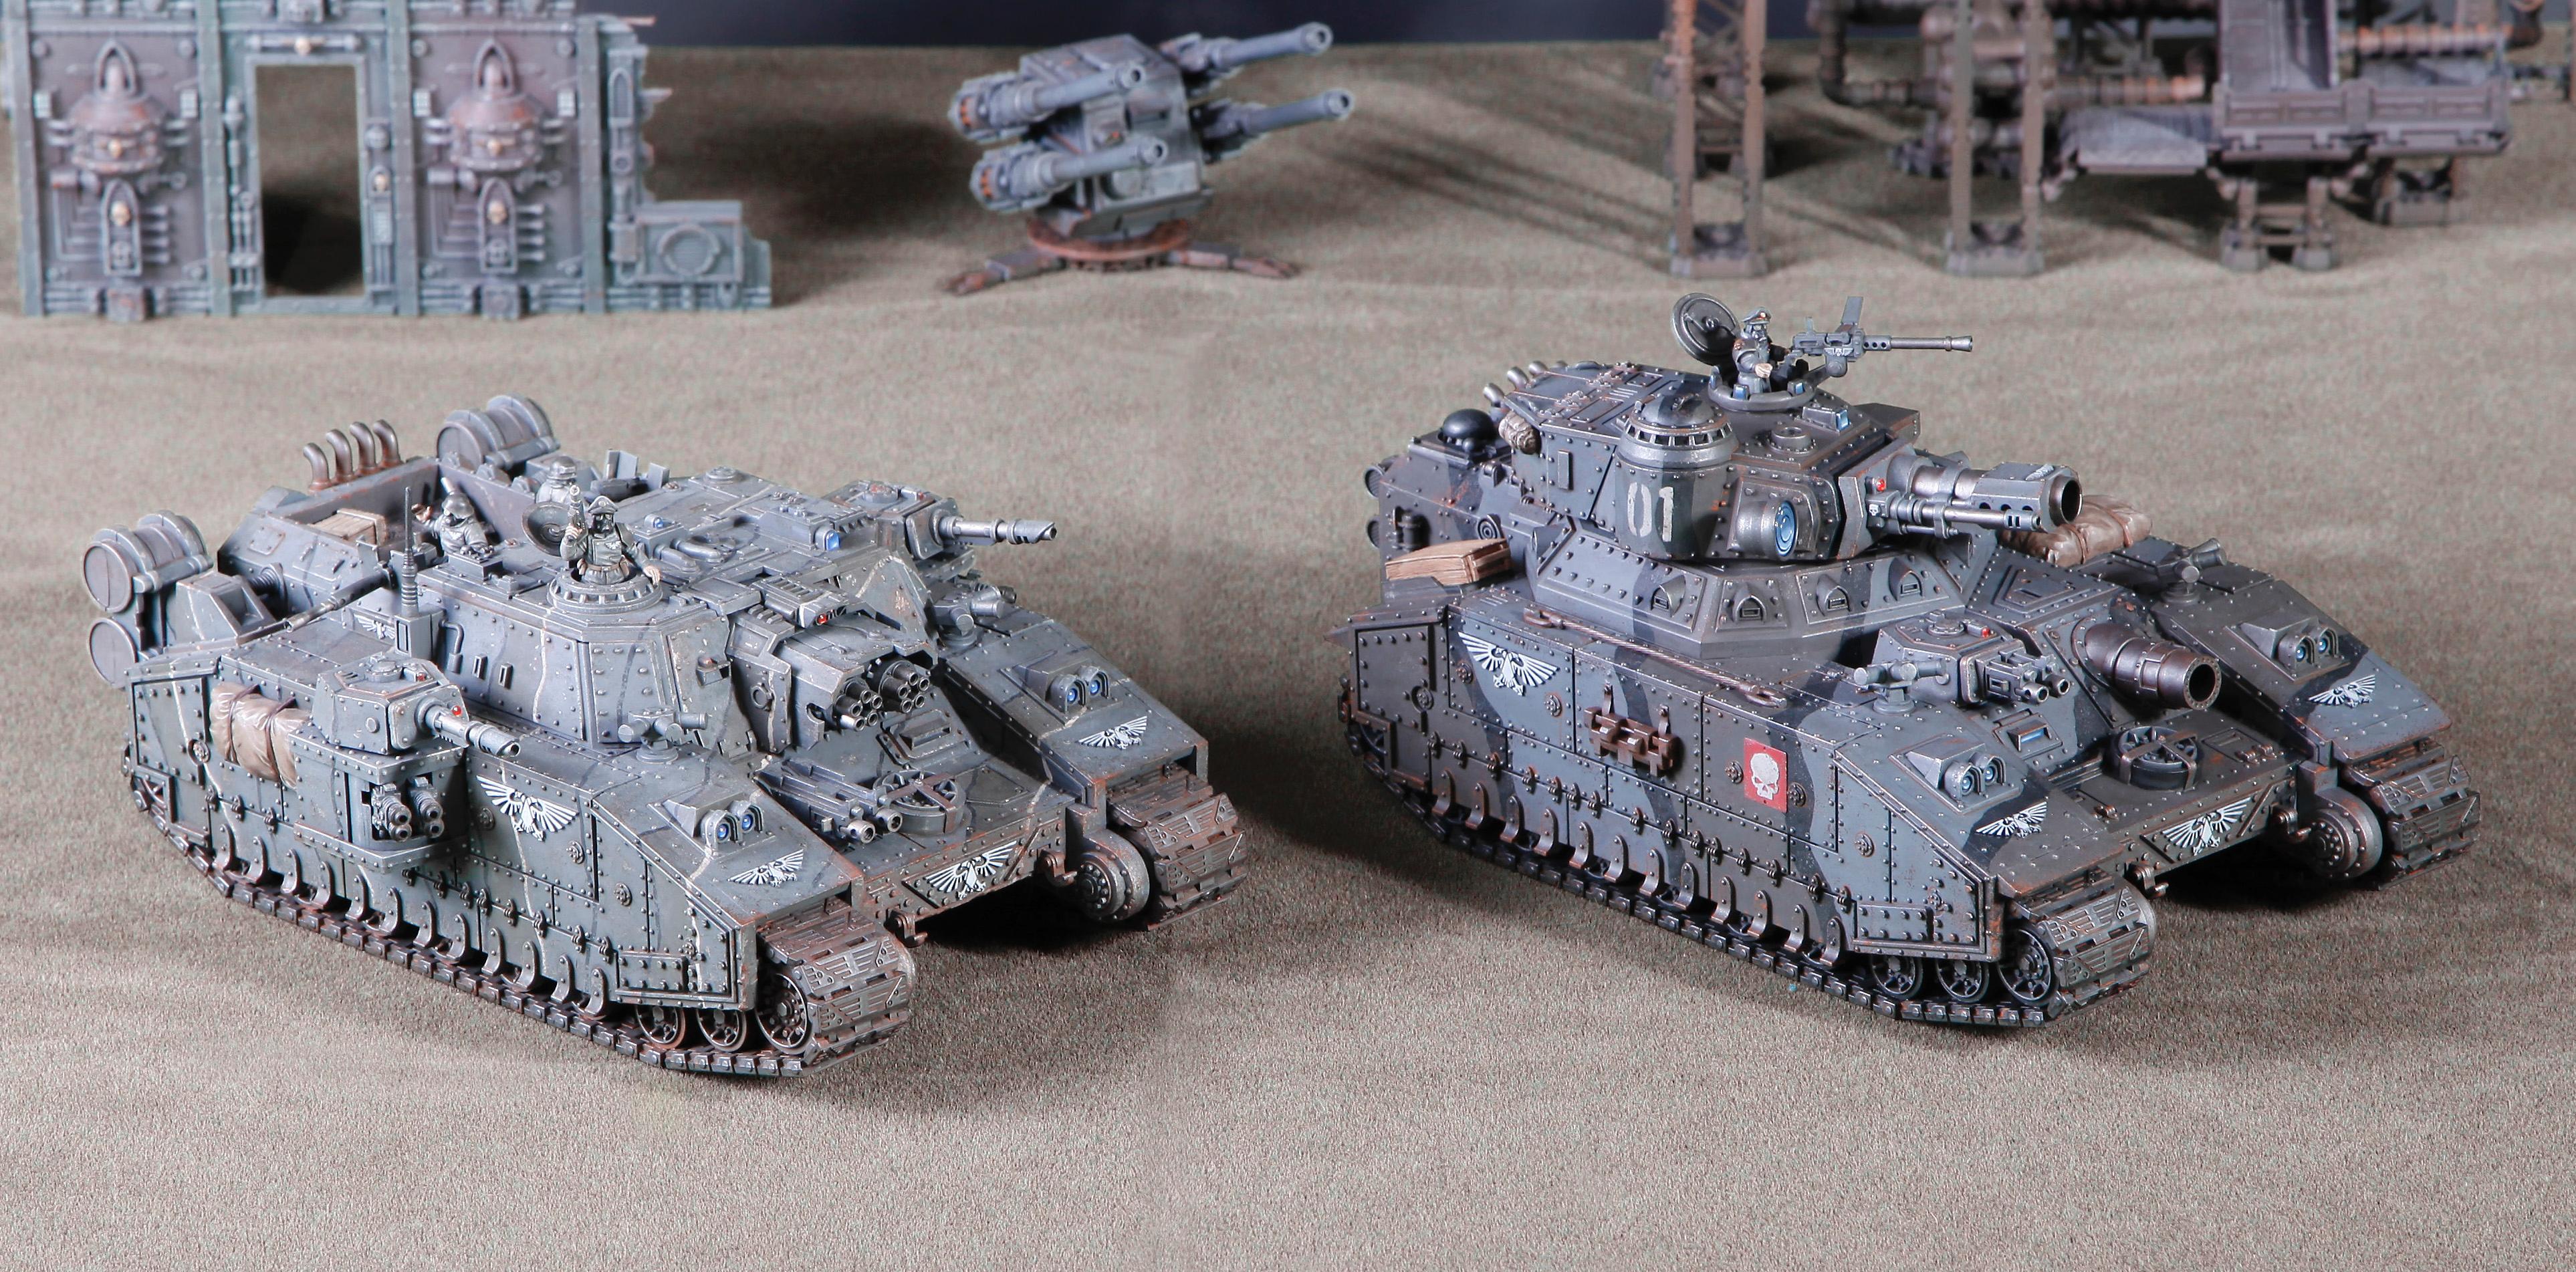 Baneblade, Camouflage, Hellhammer, Imperial Guard, Strom Lord, Super-heavy